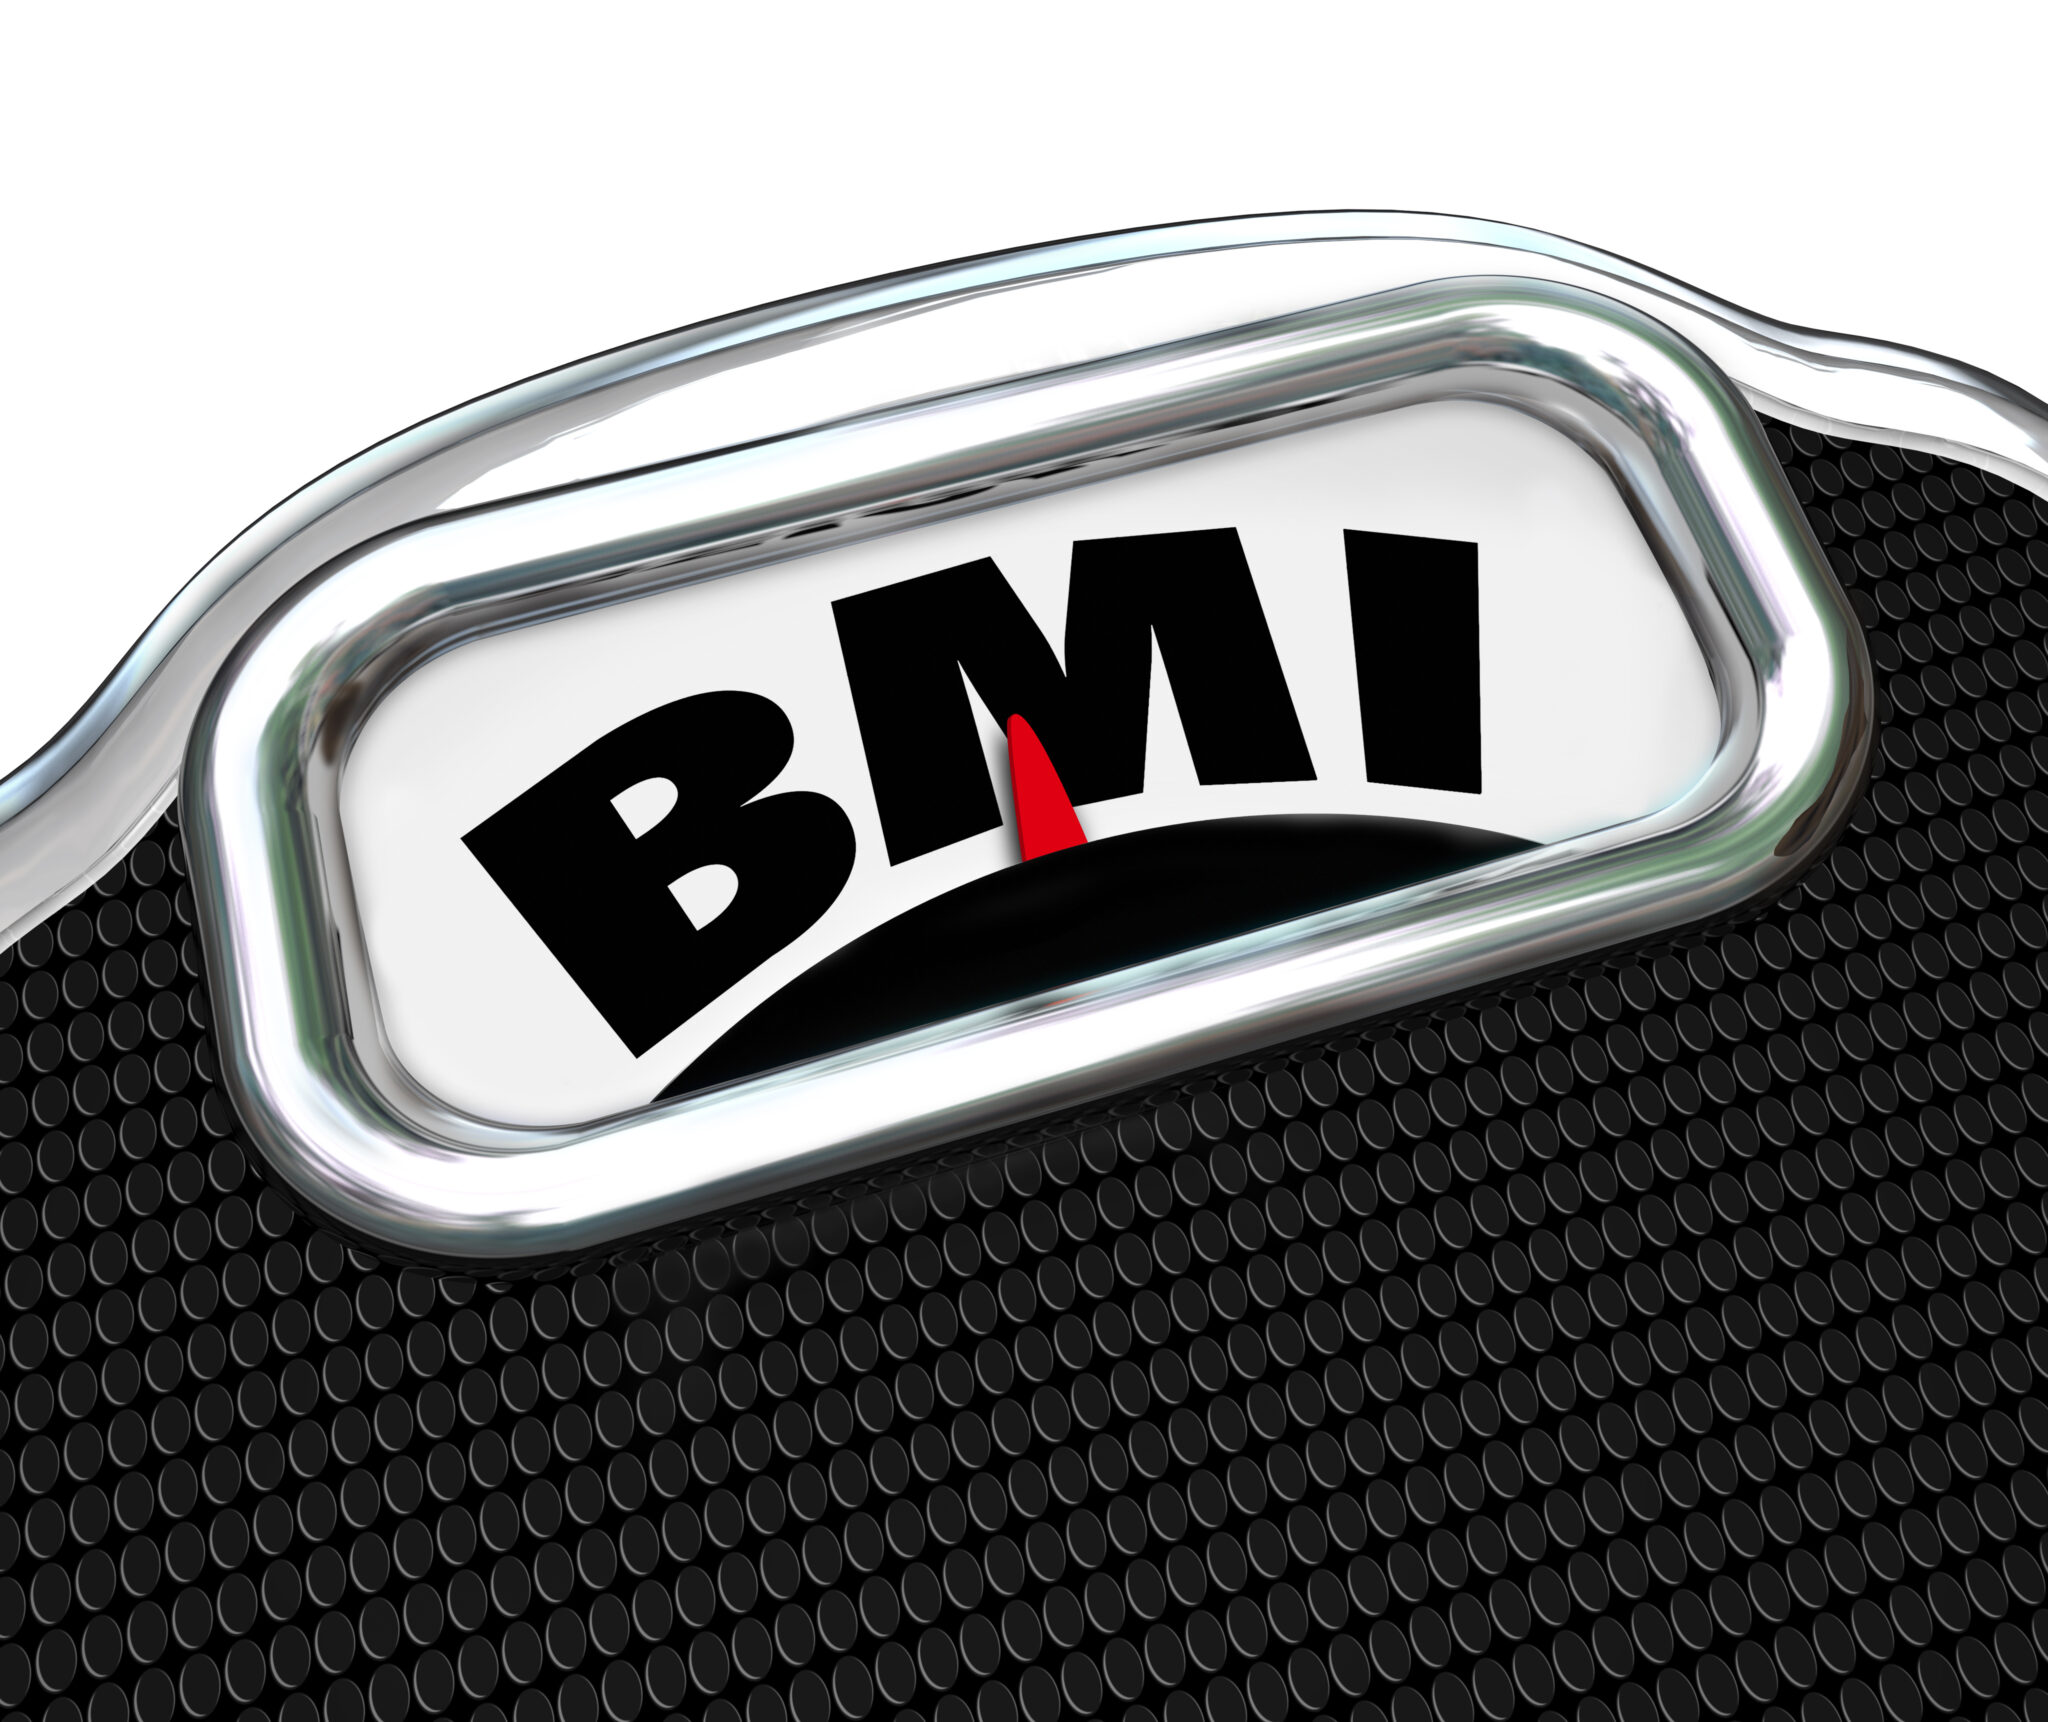 Bmi,Acronym,For,Body,Mass,Index,Measurement,On,A,Scale